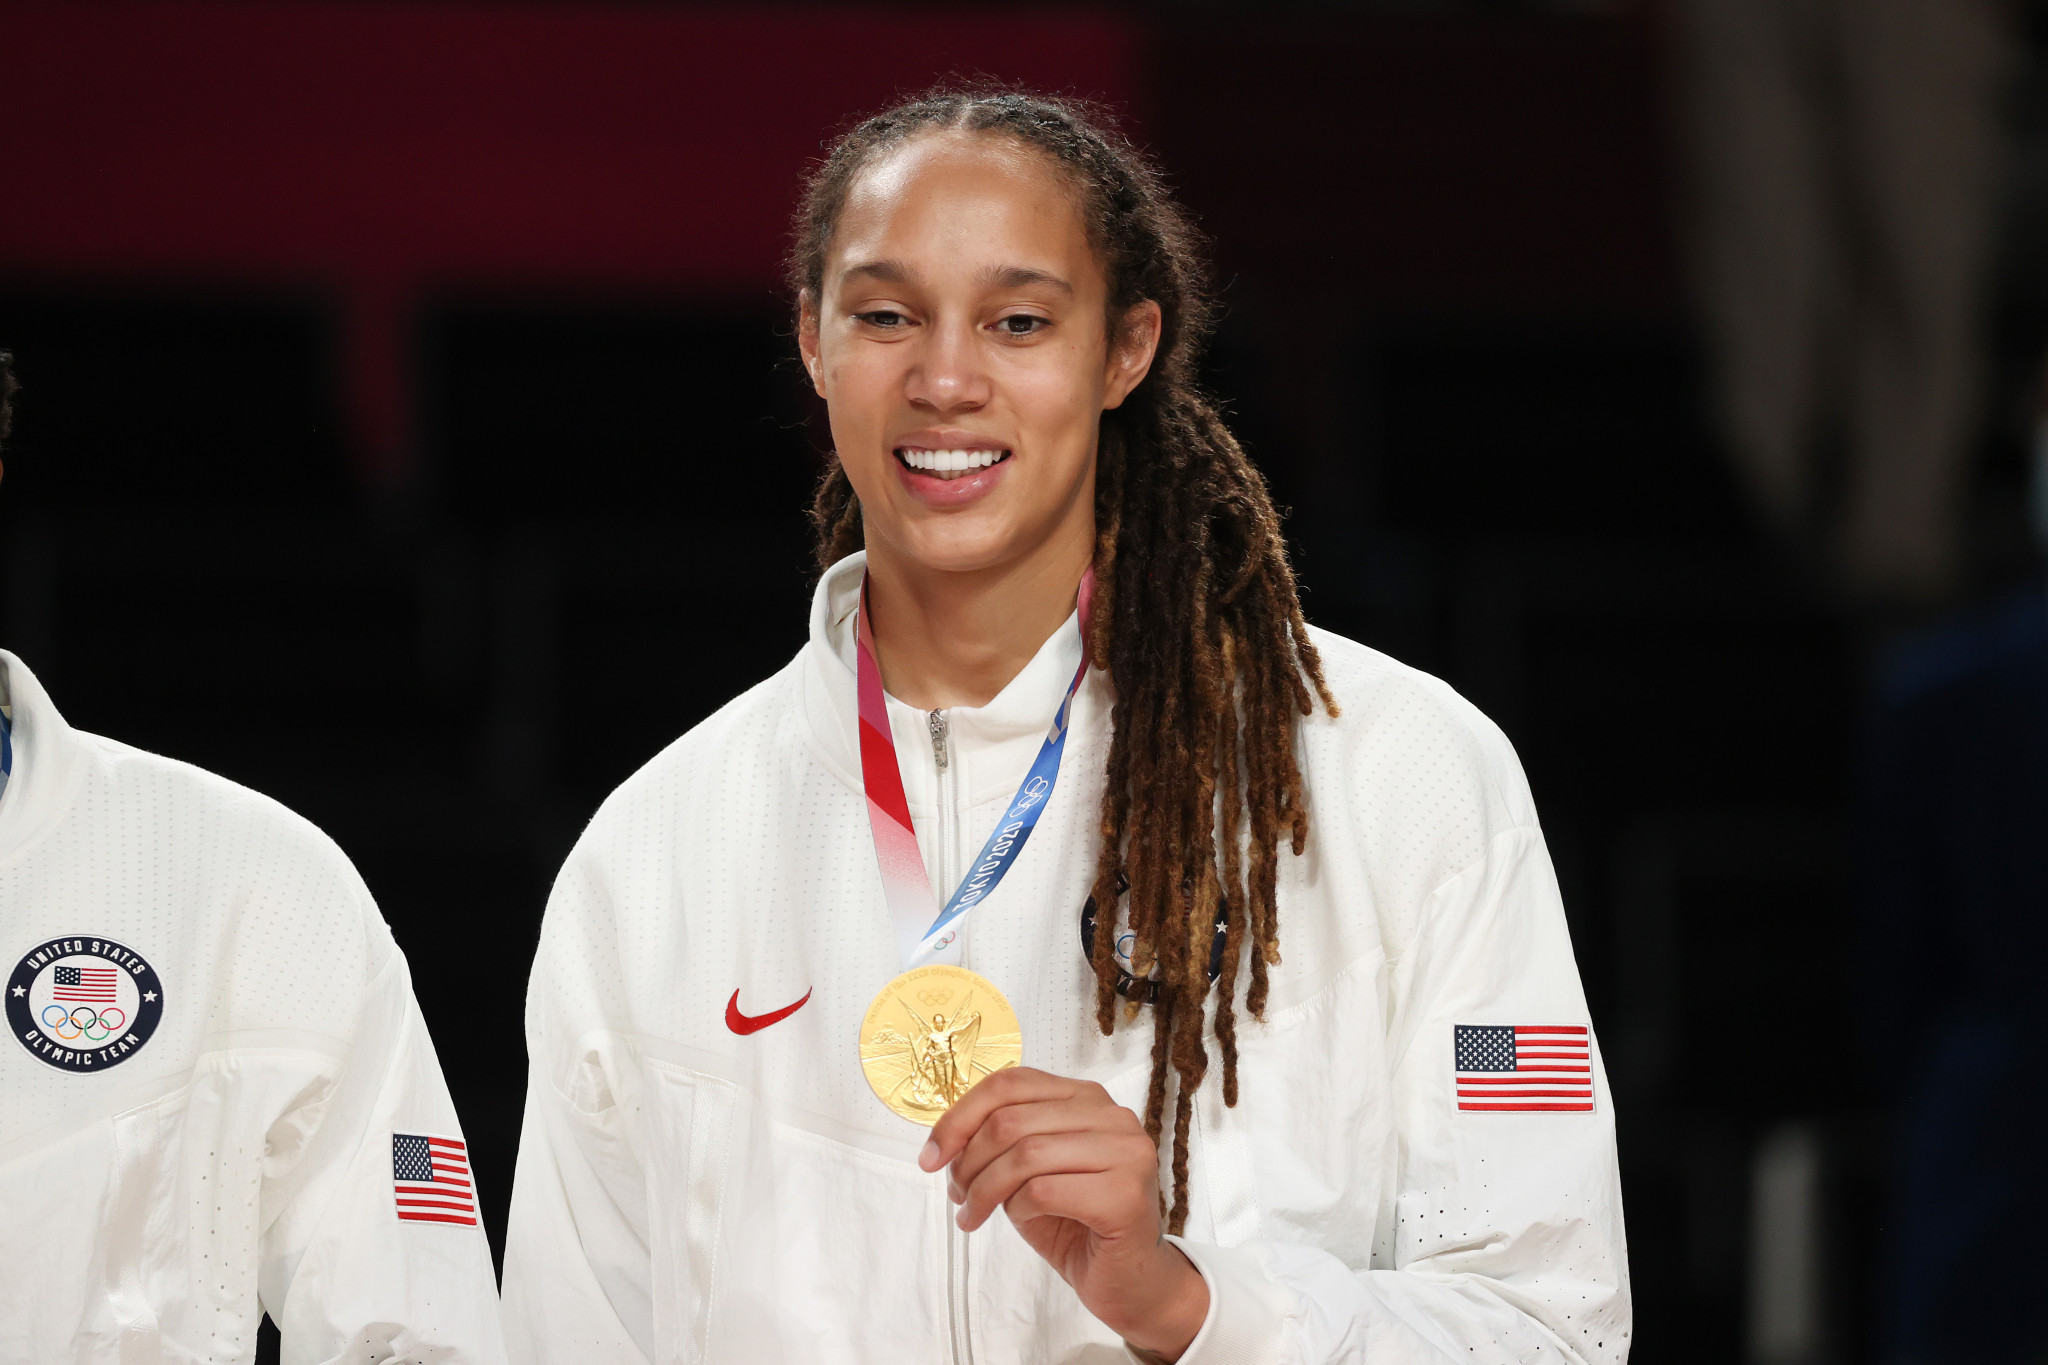 Players' union WNBPA renews call for Griner's release as she passes 100 days in detention in Russia